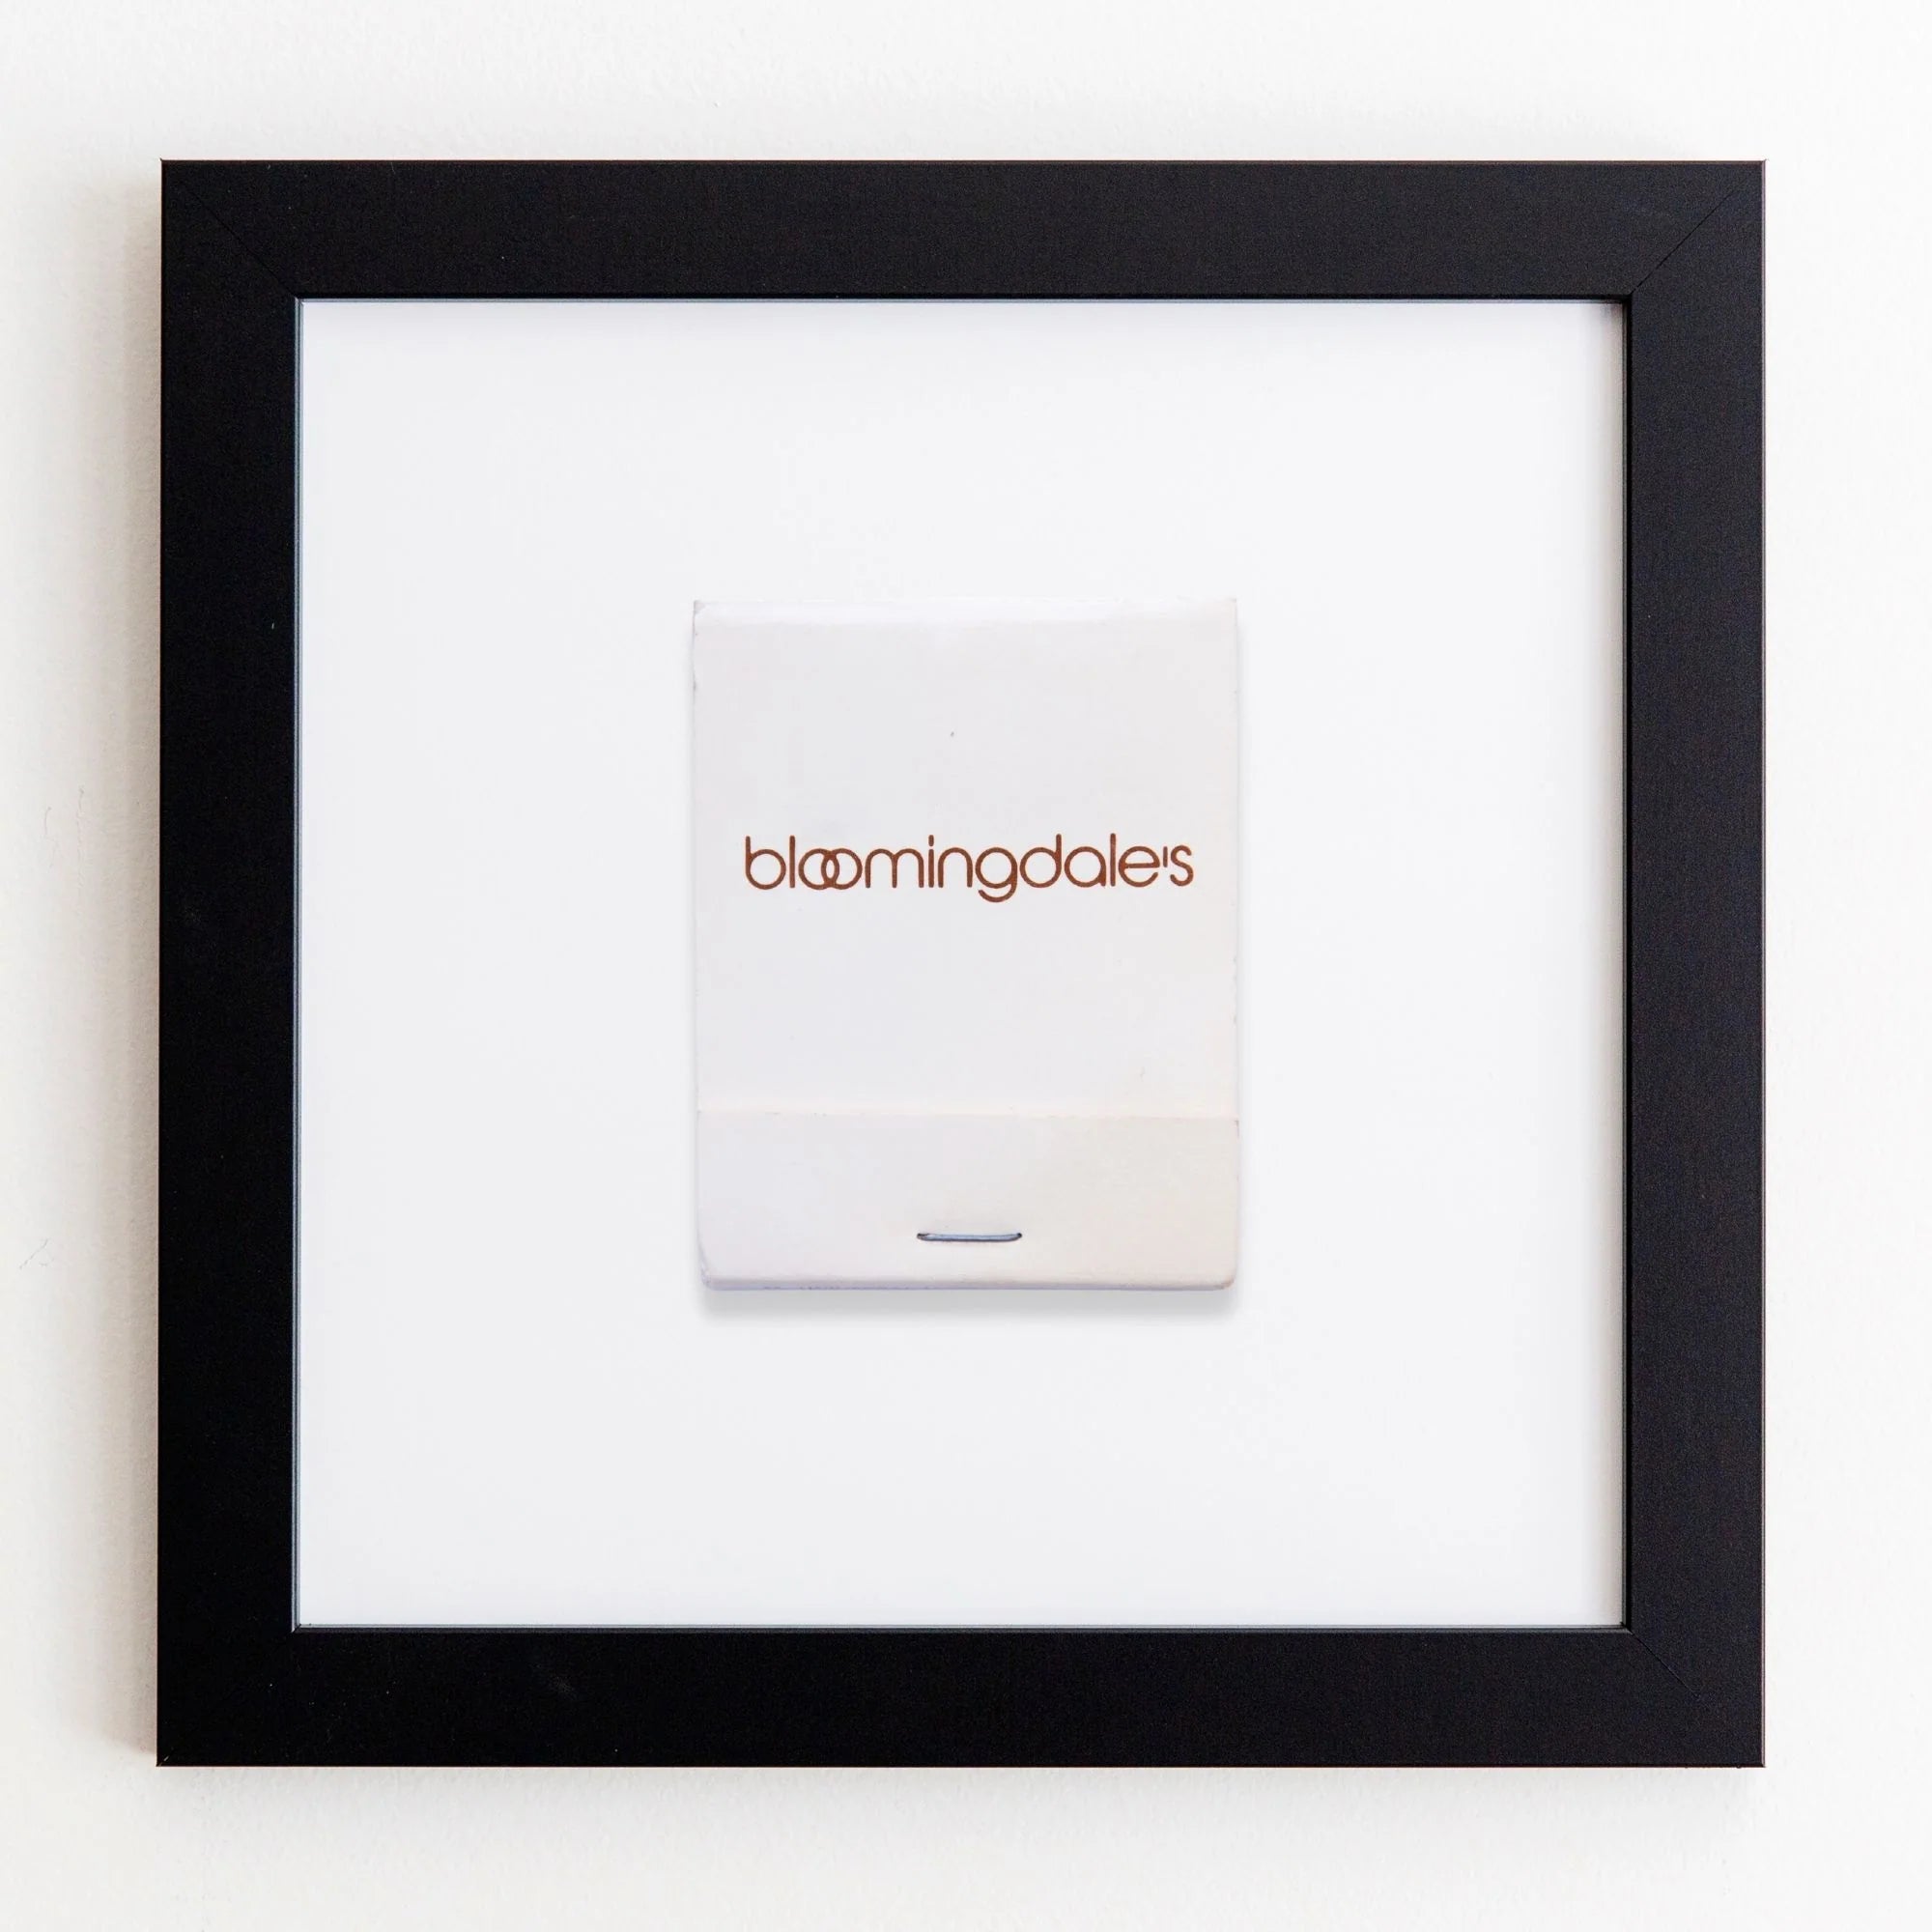 A framed Match South shopping bag, centered within a black acrylic frame, mounted on a white wall. The bag is plain white with the store&#39;s logo in lowercase black letters.